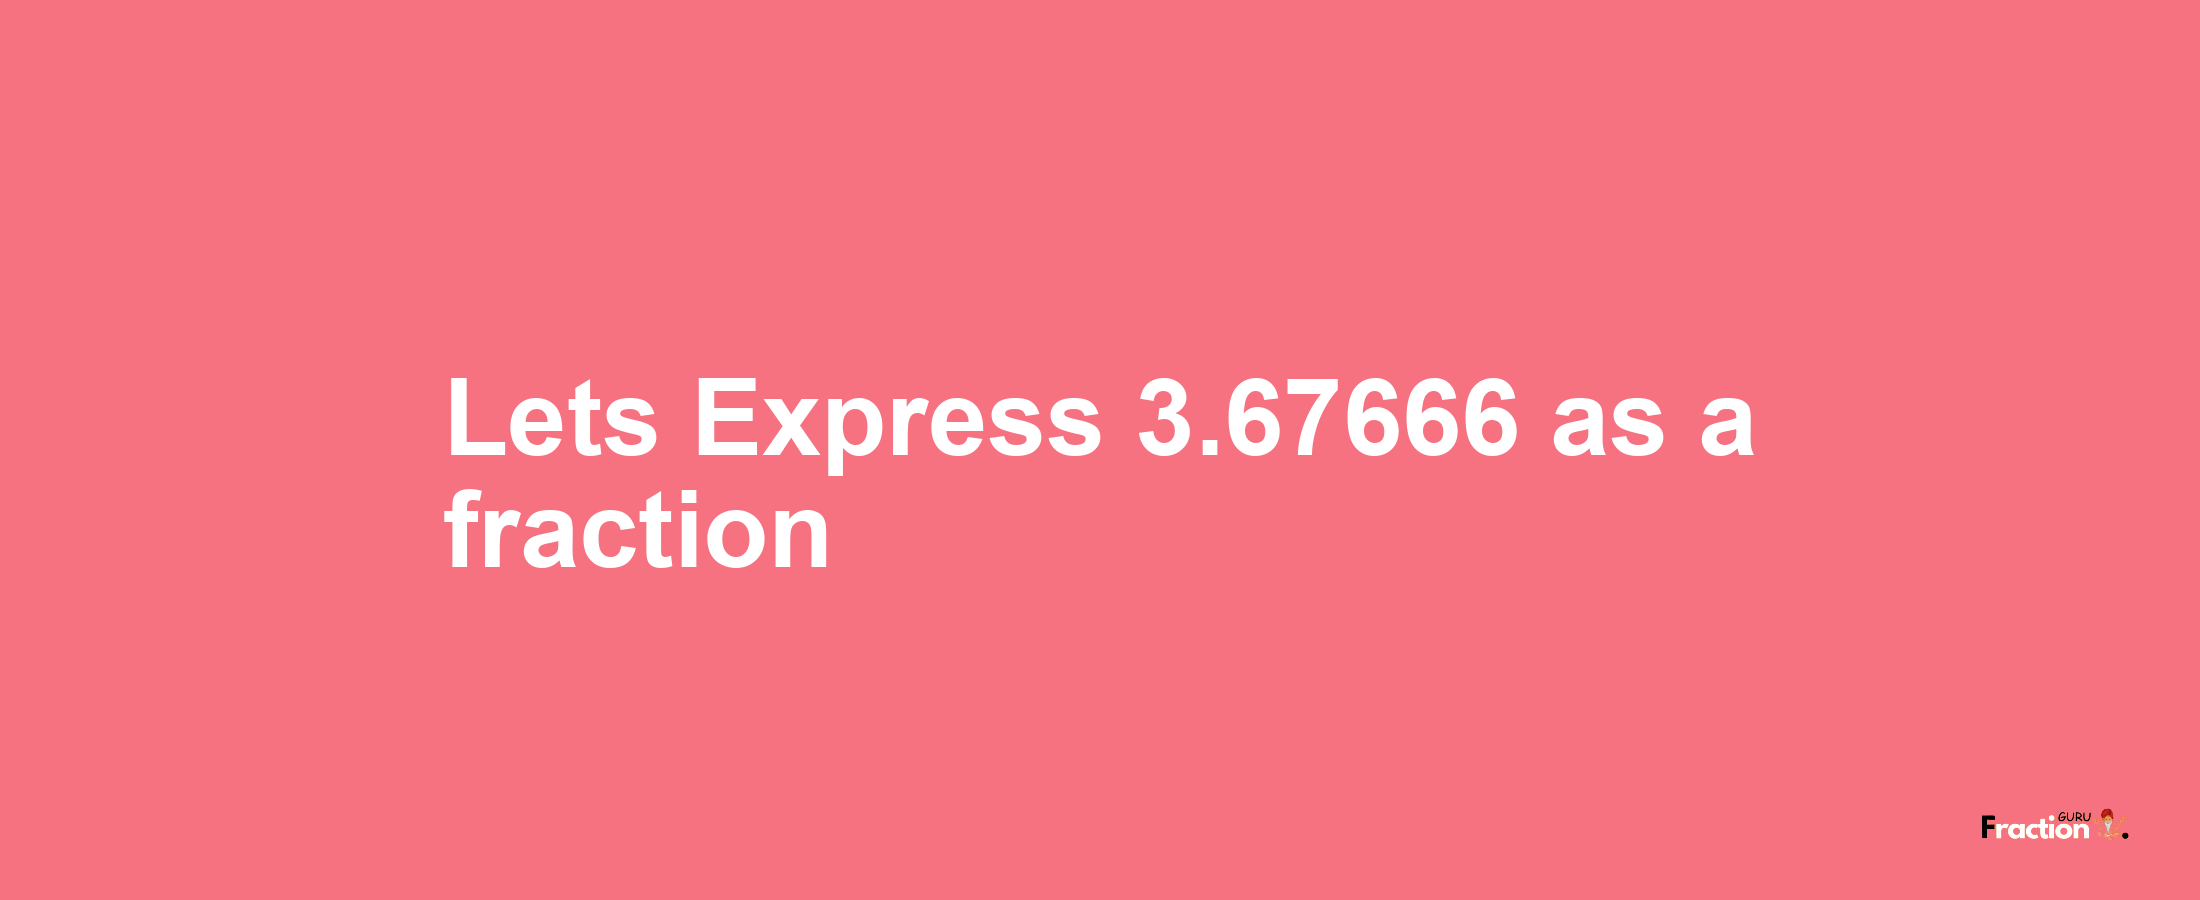 Lets Express 3.67666 as afraction